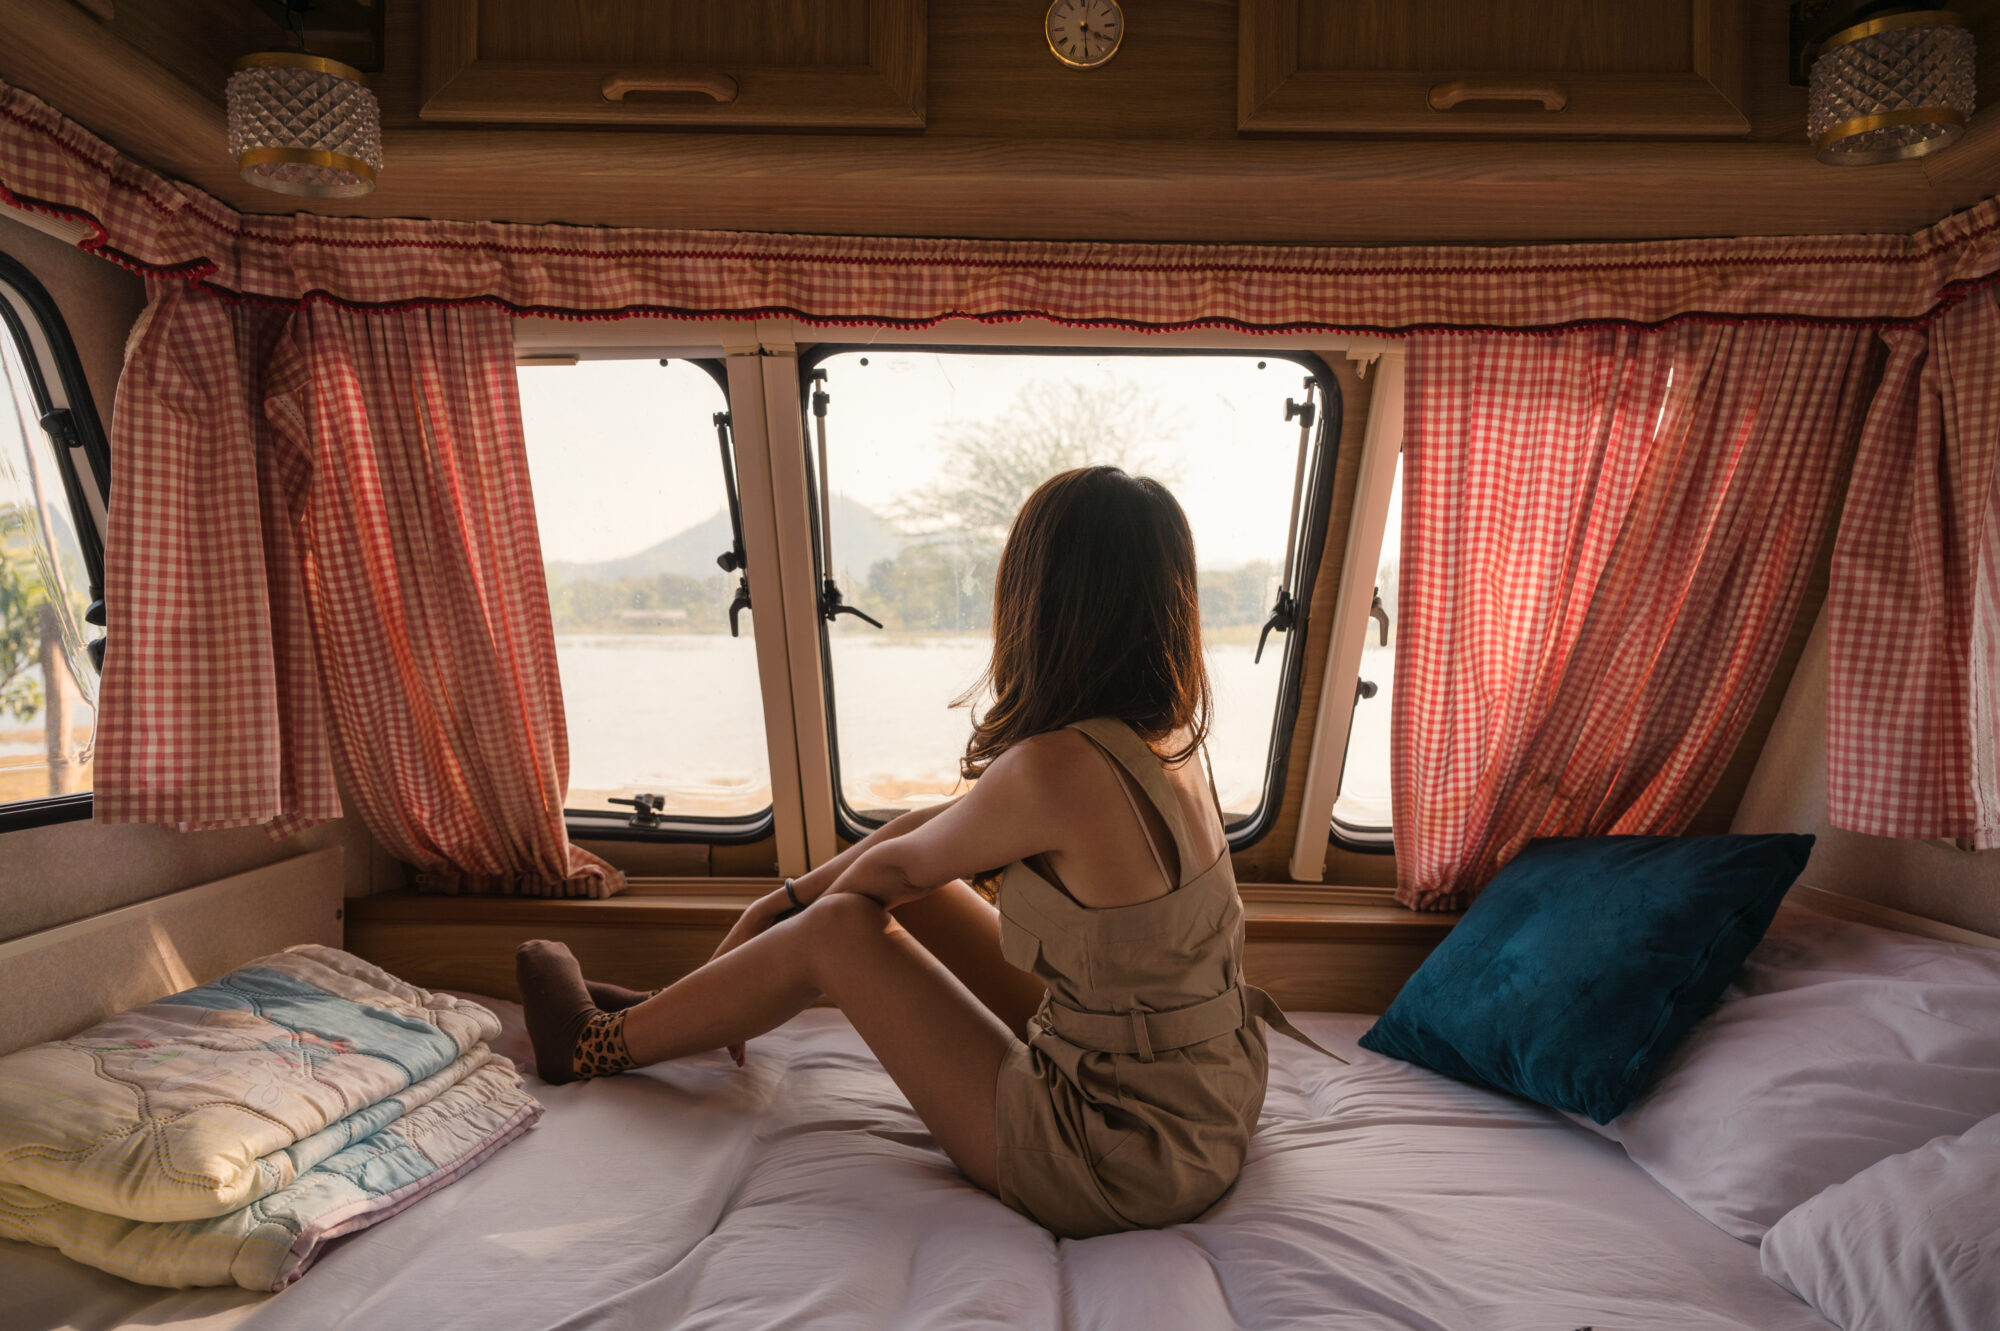  woman relaxing and looking at the view from her campervan bed. Checkered-pattern curtains are hanging as window covers.